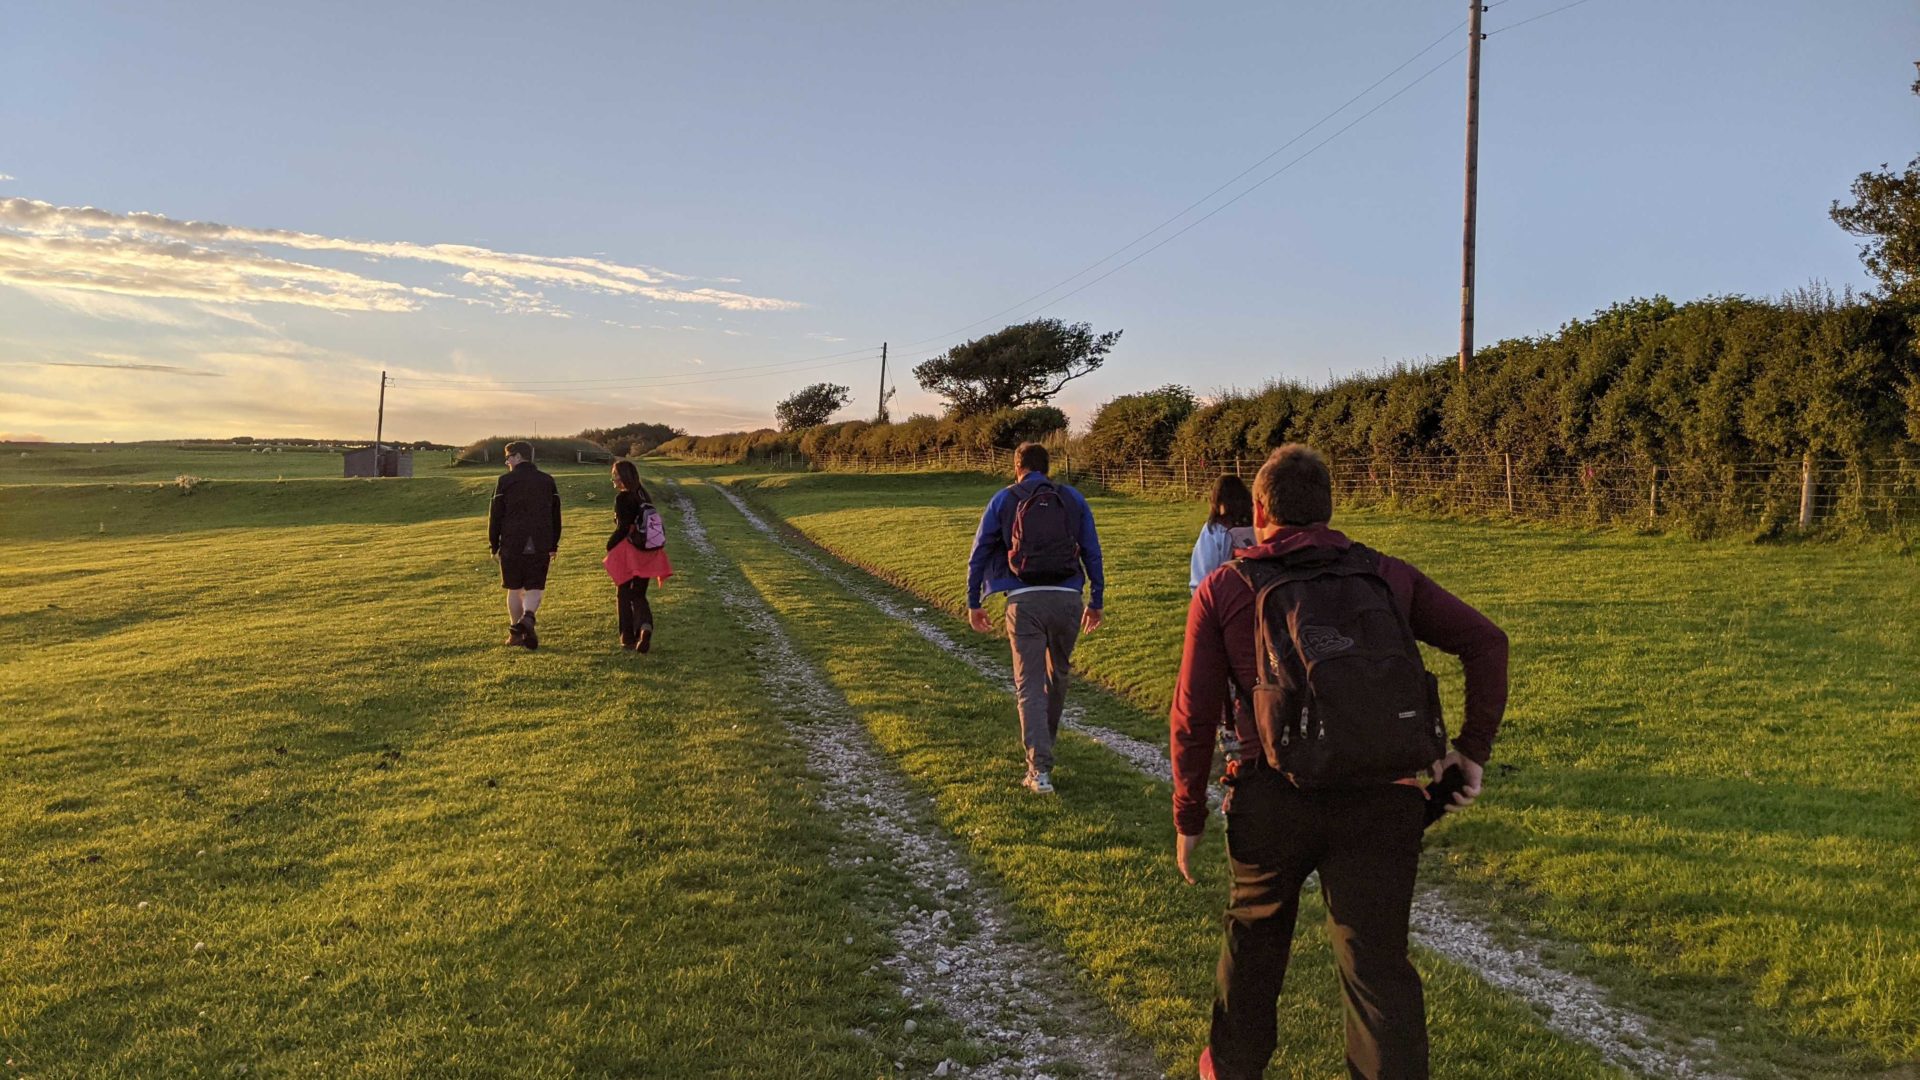 A group of people following a path through a country field at sunset.